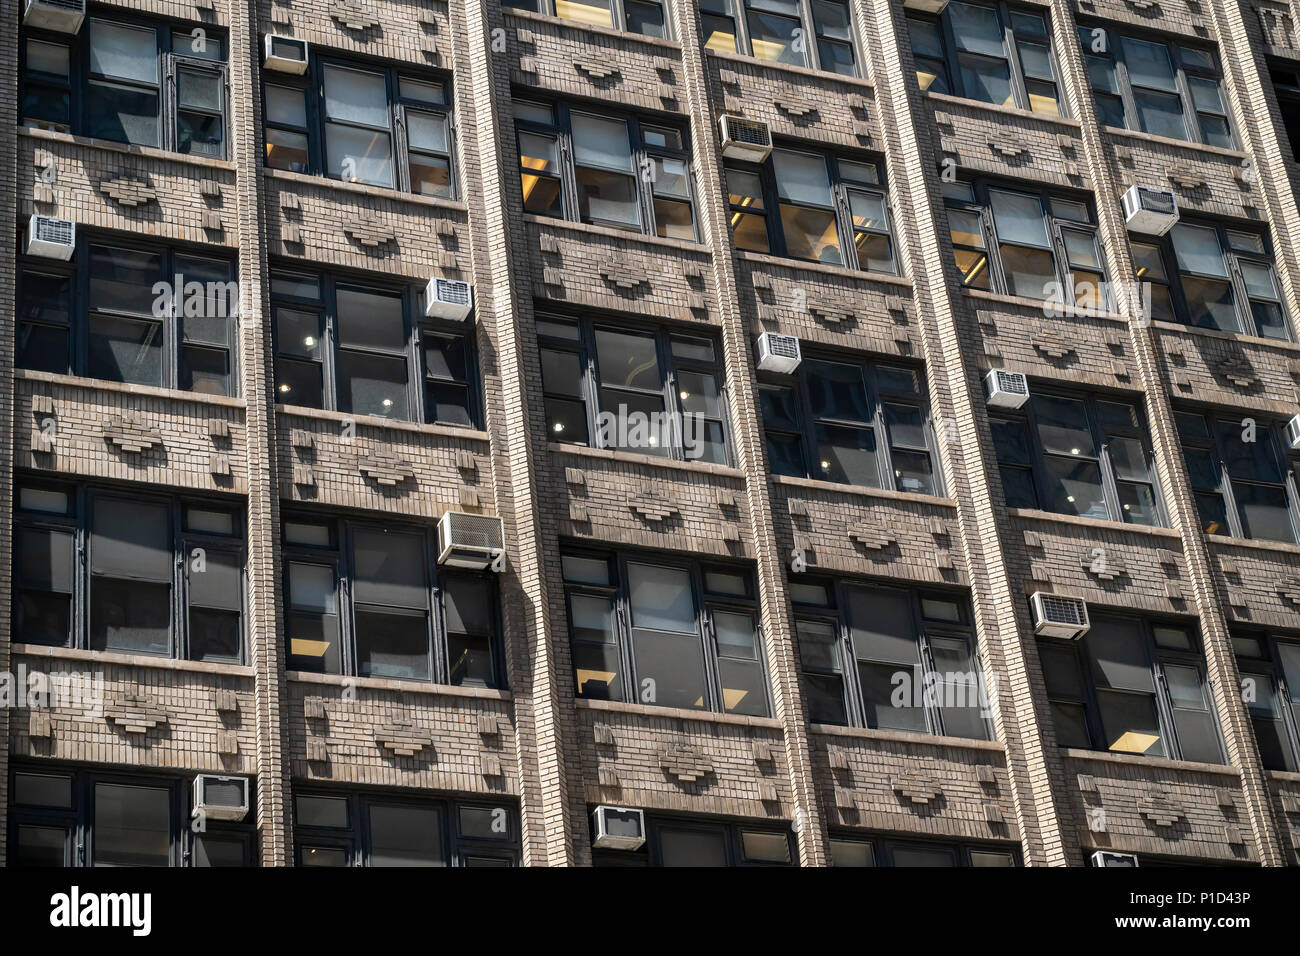 Air conditioners sprout from windows in an older office building in New York on Thursday, May 24, 2018. (Â© Richard B. Levine) Stock Photo